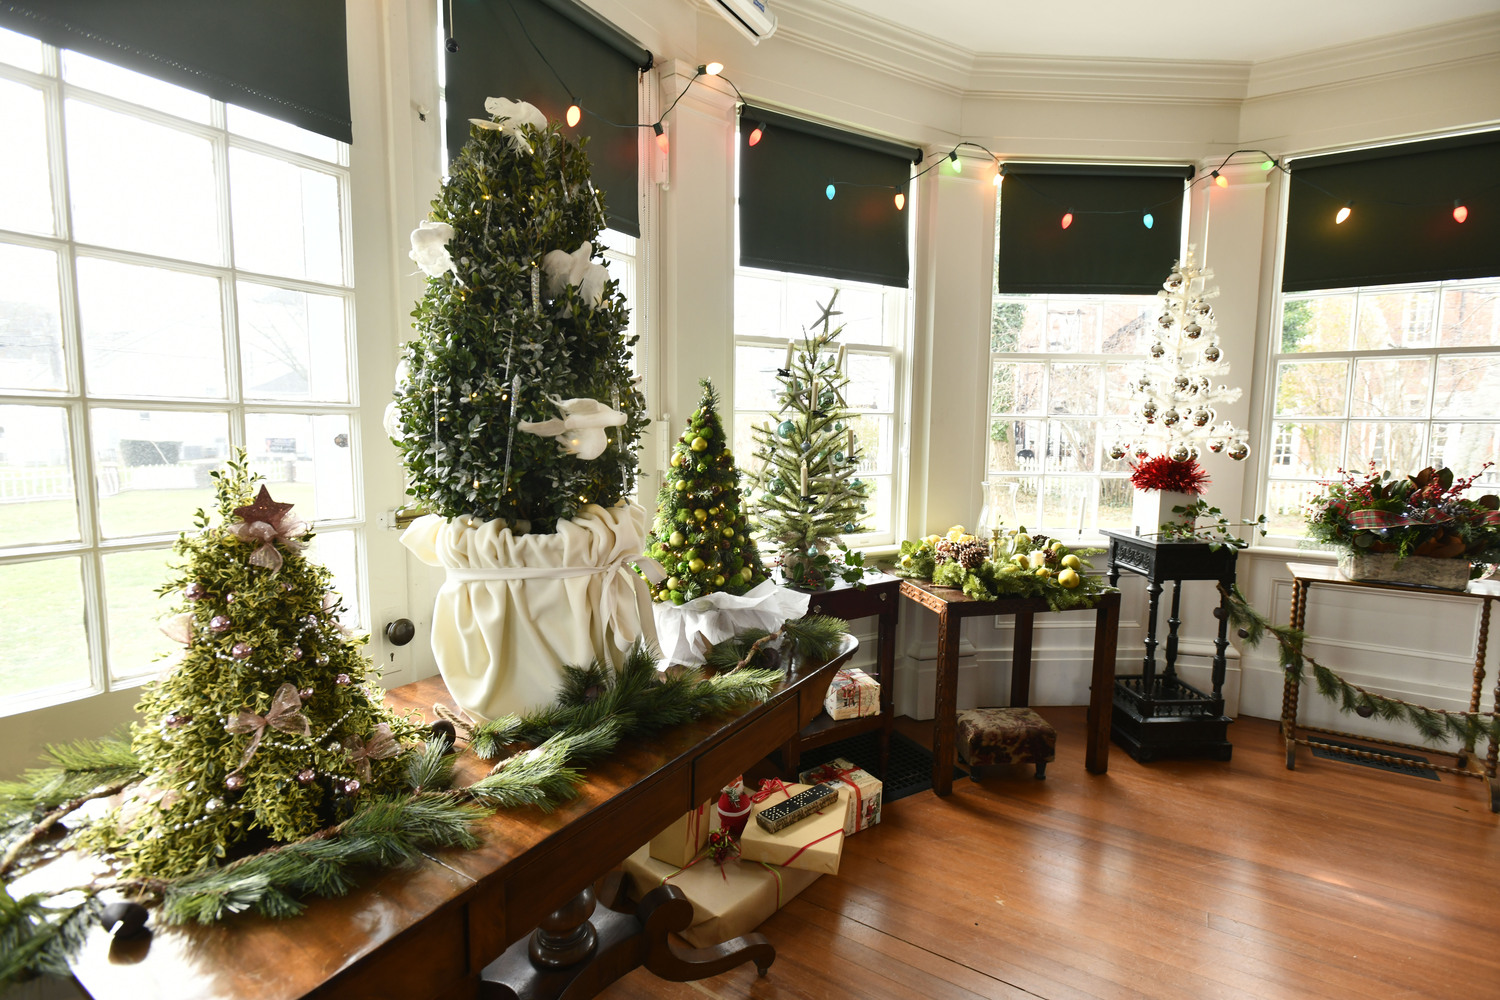 The Southampton History Museum has made tabletop Christmas trees an event and holiday tradition at Rogers Mansion in Southampton Village. Dana Shaw photos